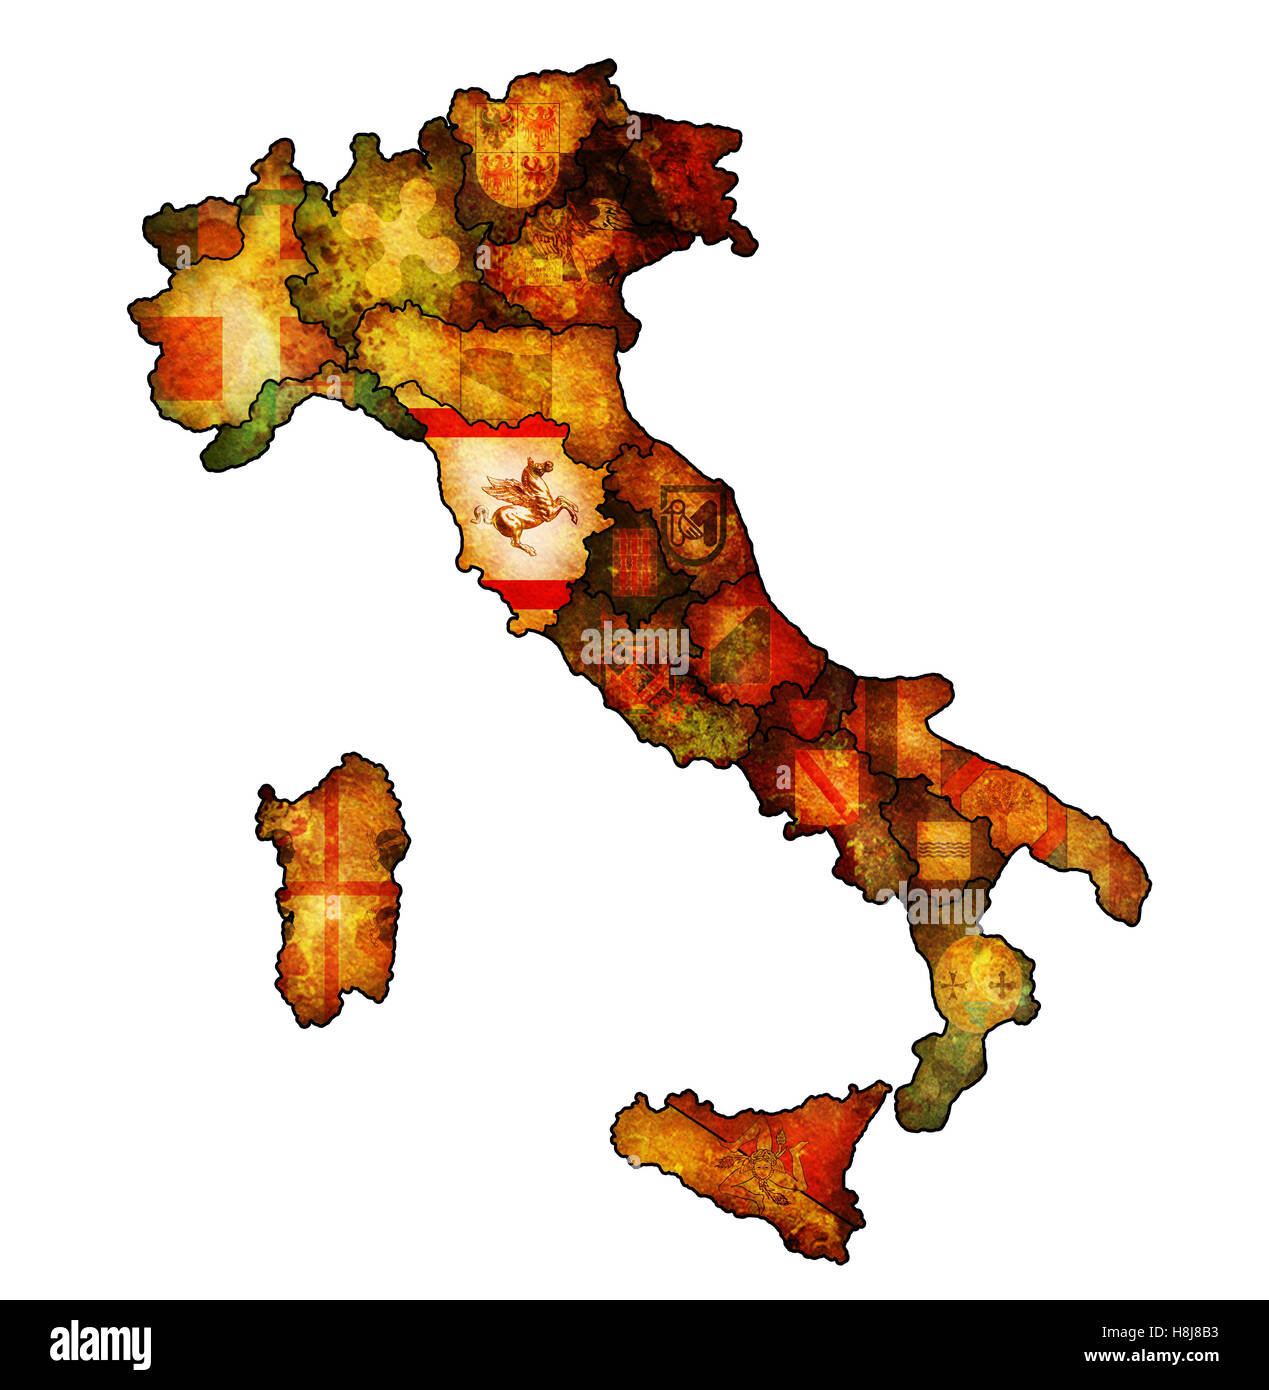 tuscany region on administration map of italy with flags Stock Photo